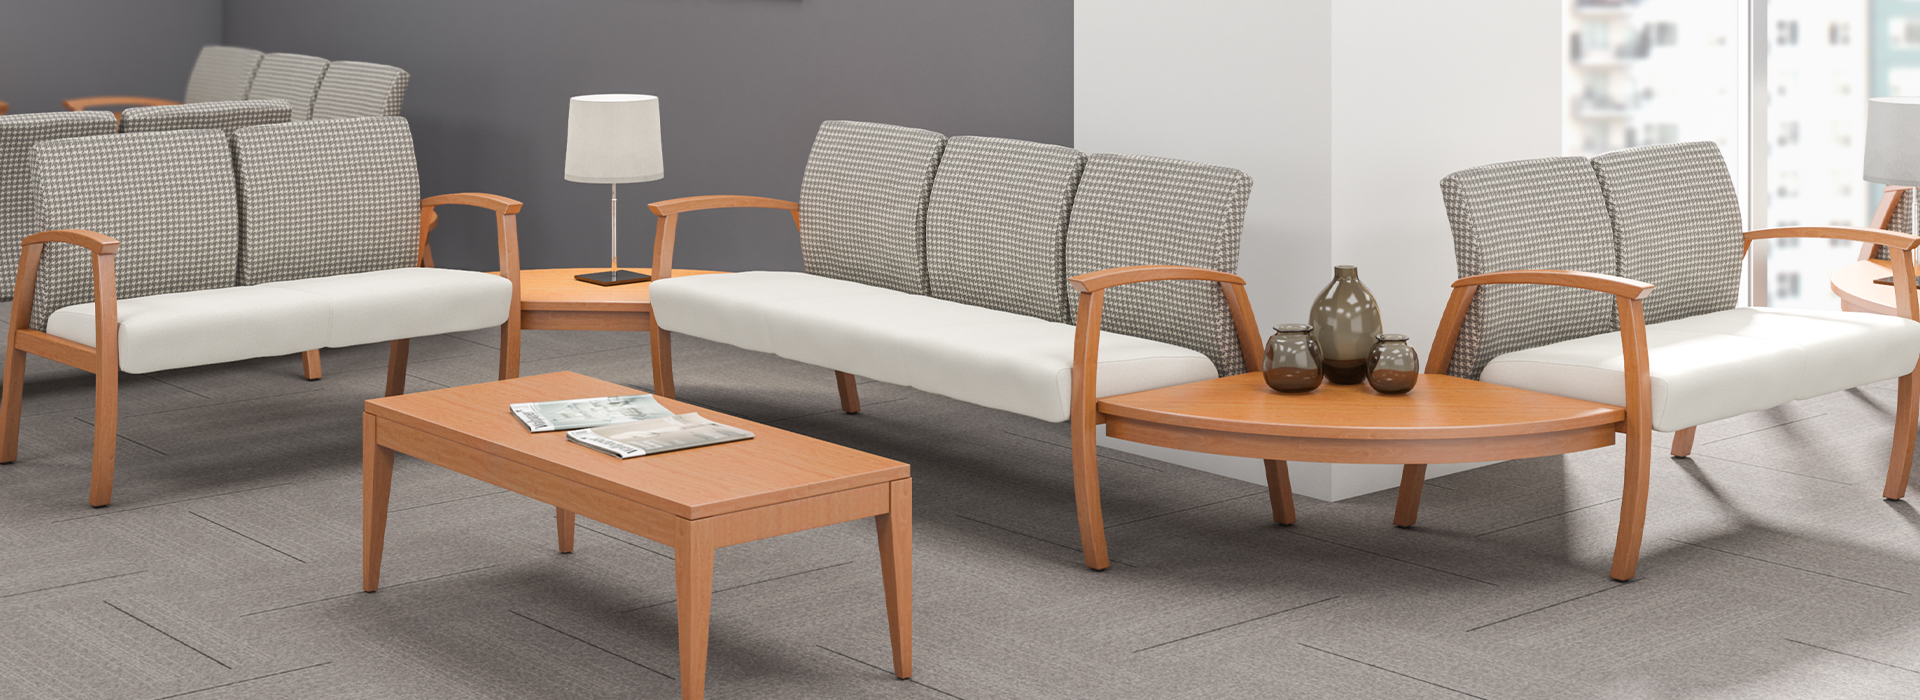 Furniture for Healthcare Environments | Ethosource